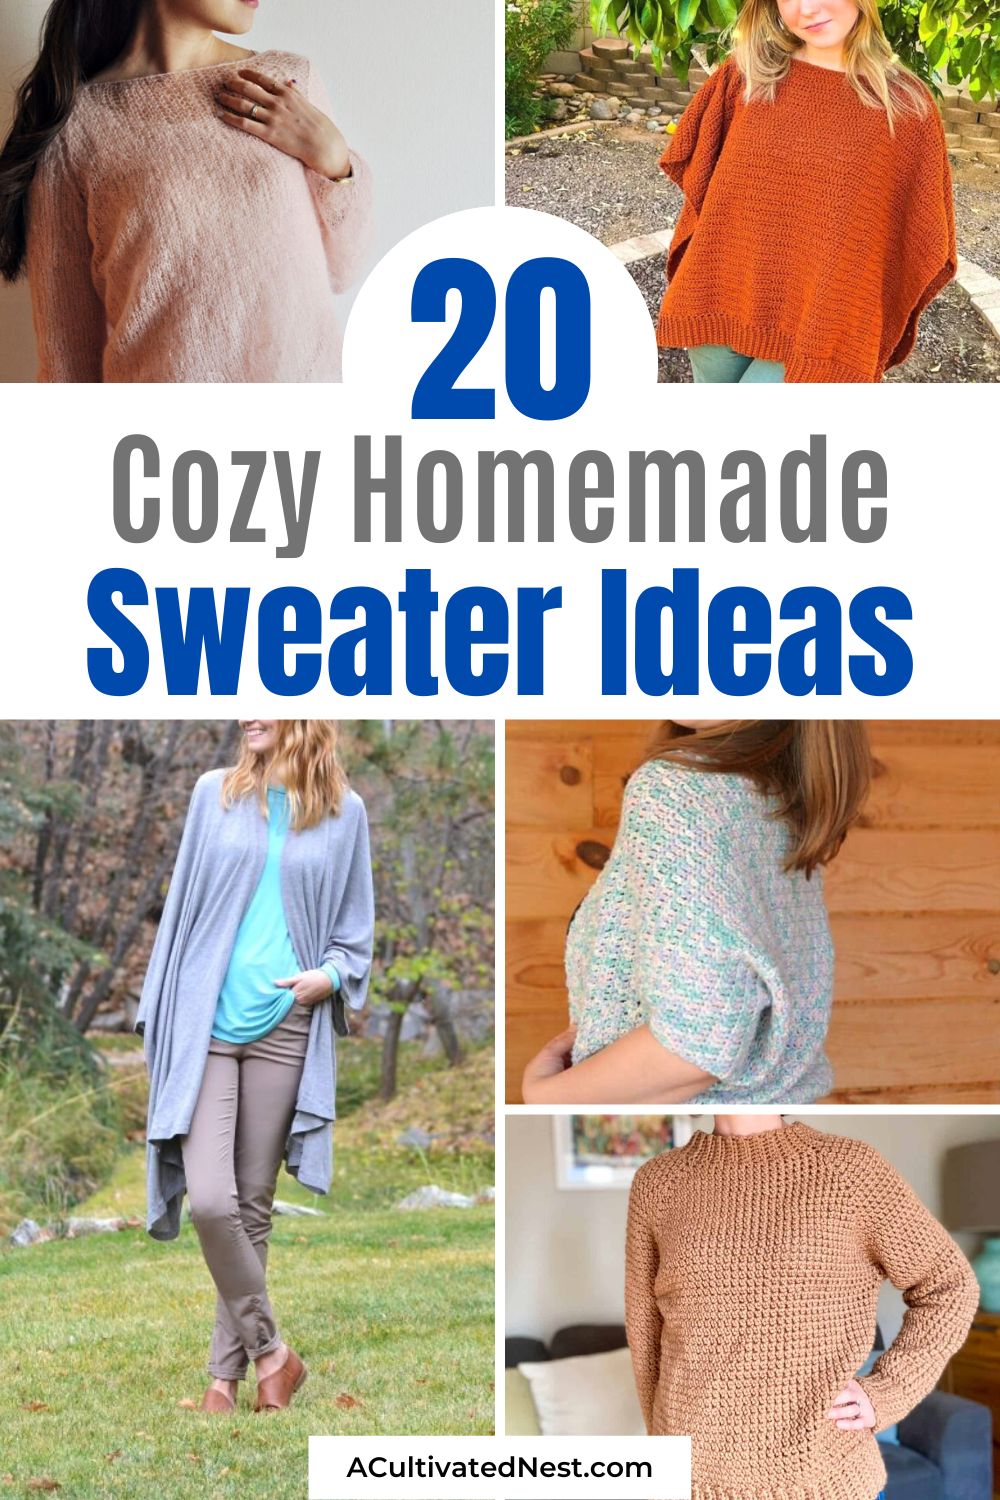 20 Cozy Homemade Sweater Ideas- Wintertime is here, and that means sweater time! If you want to stay warm this winter, and maybe have a lovely homemade gift to give, check out these cozy homemade sweater ideas! | free sweater crochet patterns, #diySweaters #crochetPatterns #diyGifts #homemadeGiftIdeas #ACultivatedNest